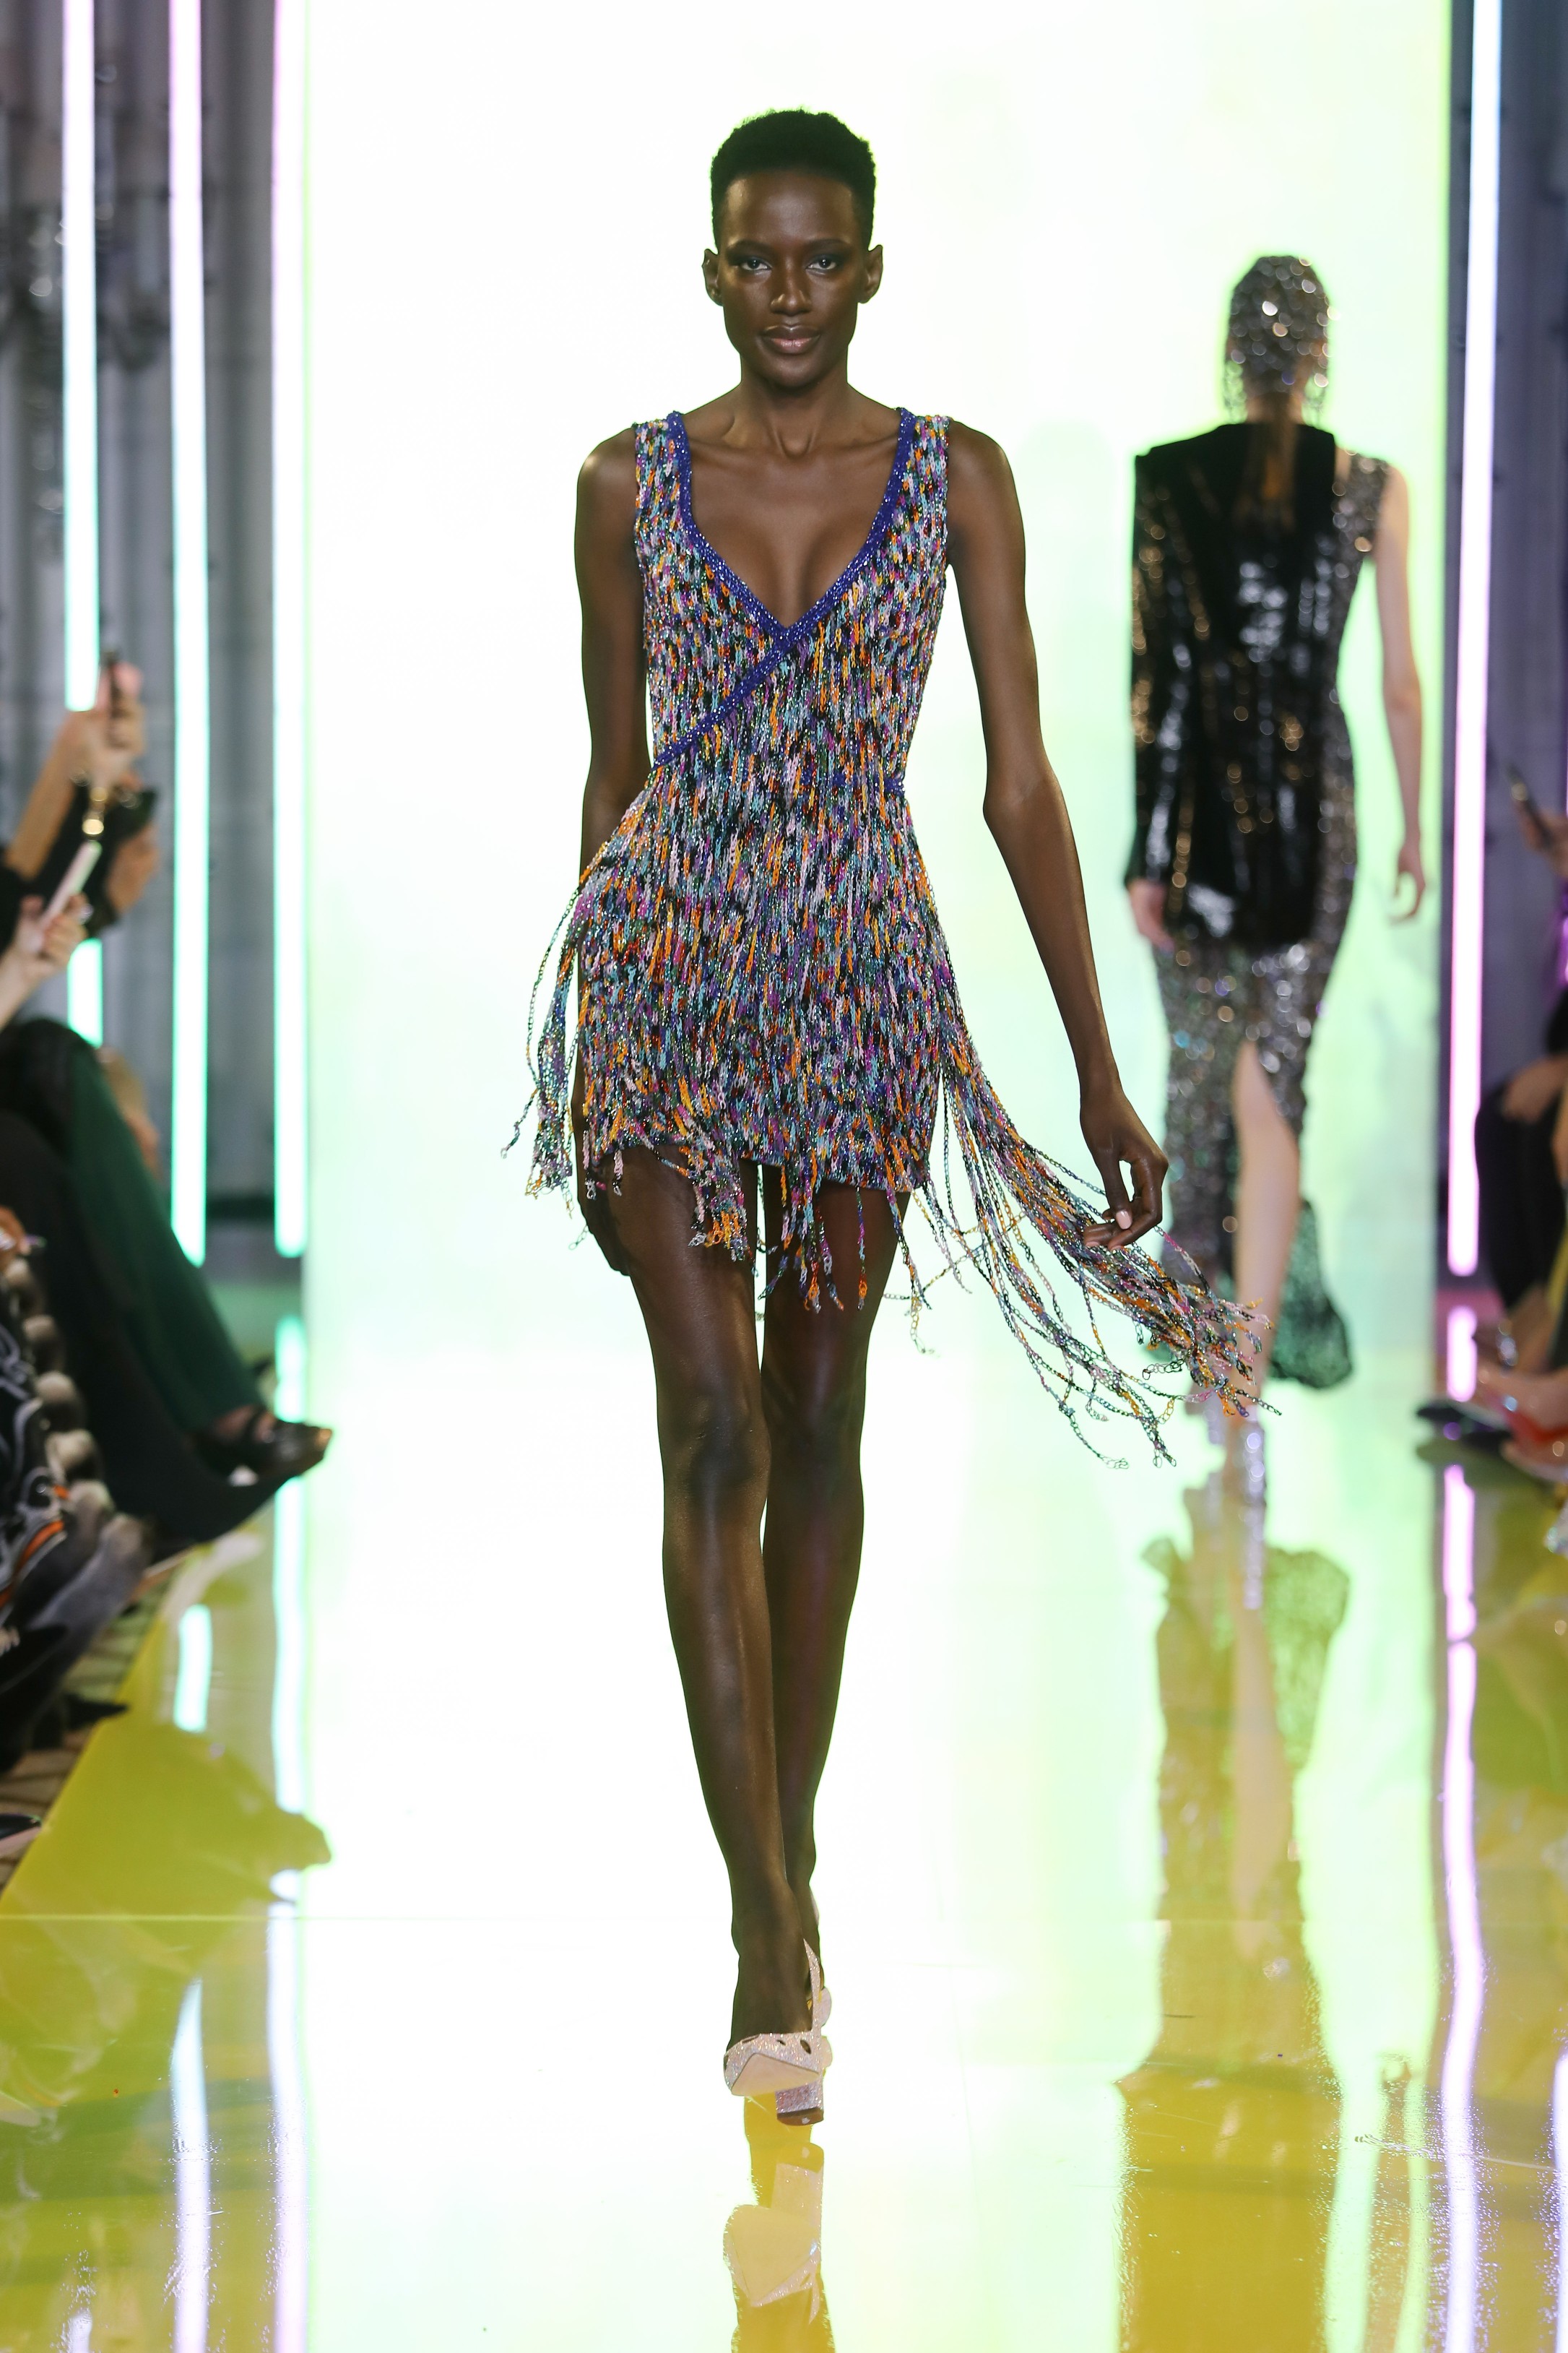 SS19-26- Black Mini Dress Featuring Braided Beads Of Fringes Highlighted Braided Neckline   .jpg